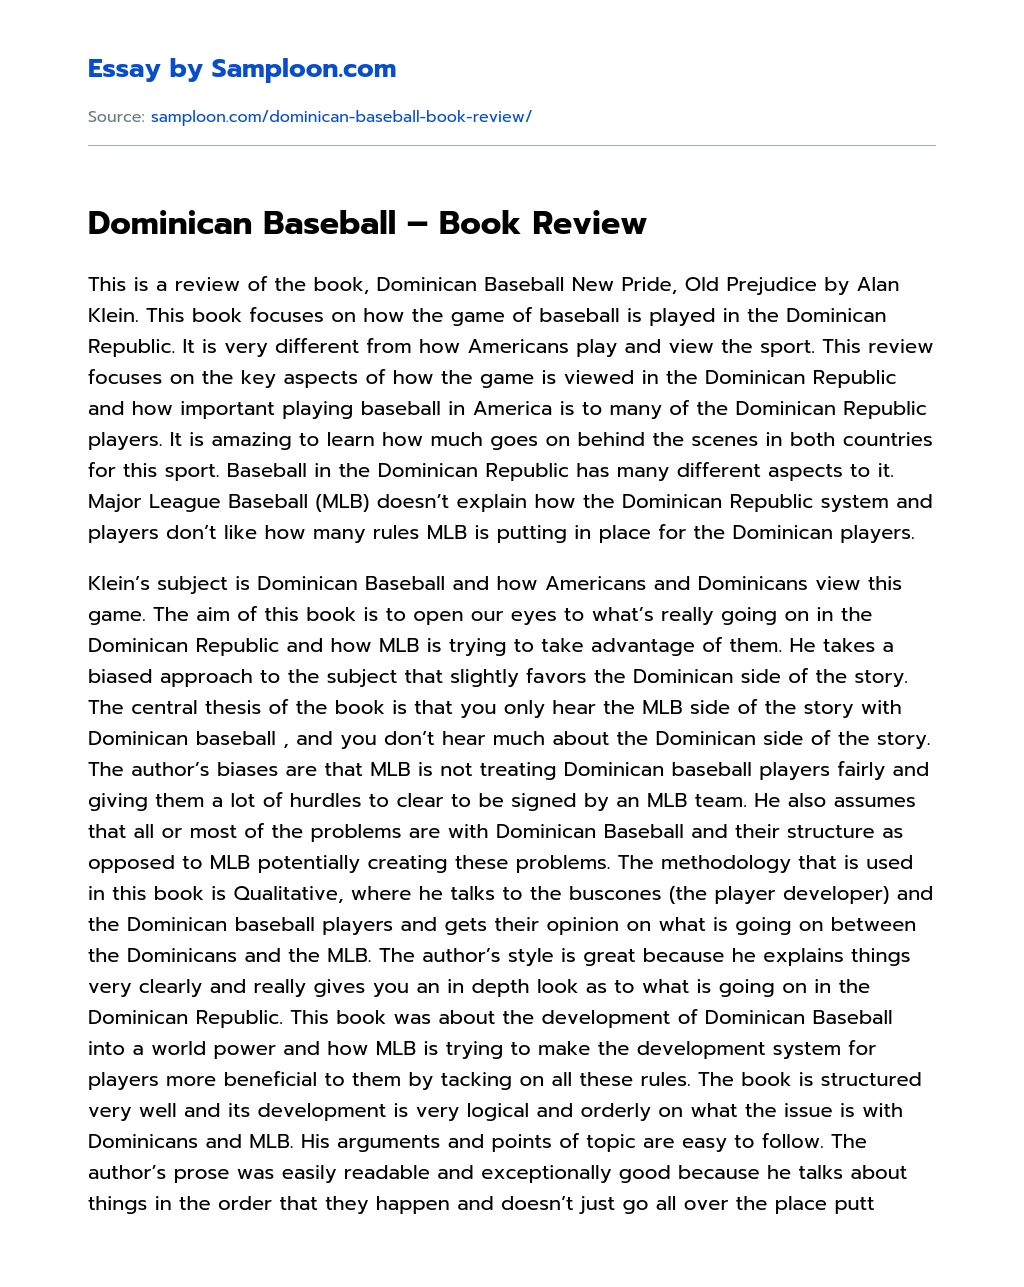 Dominican Baseball – Book Review essay